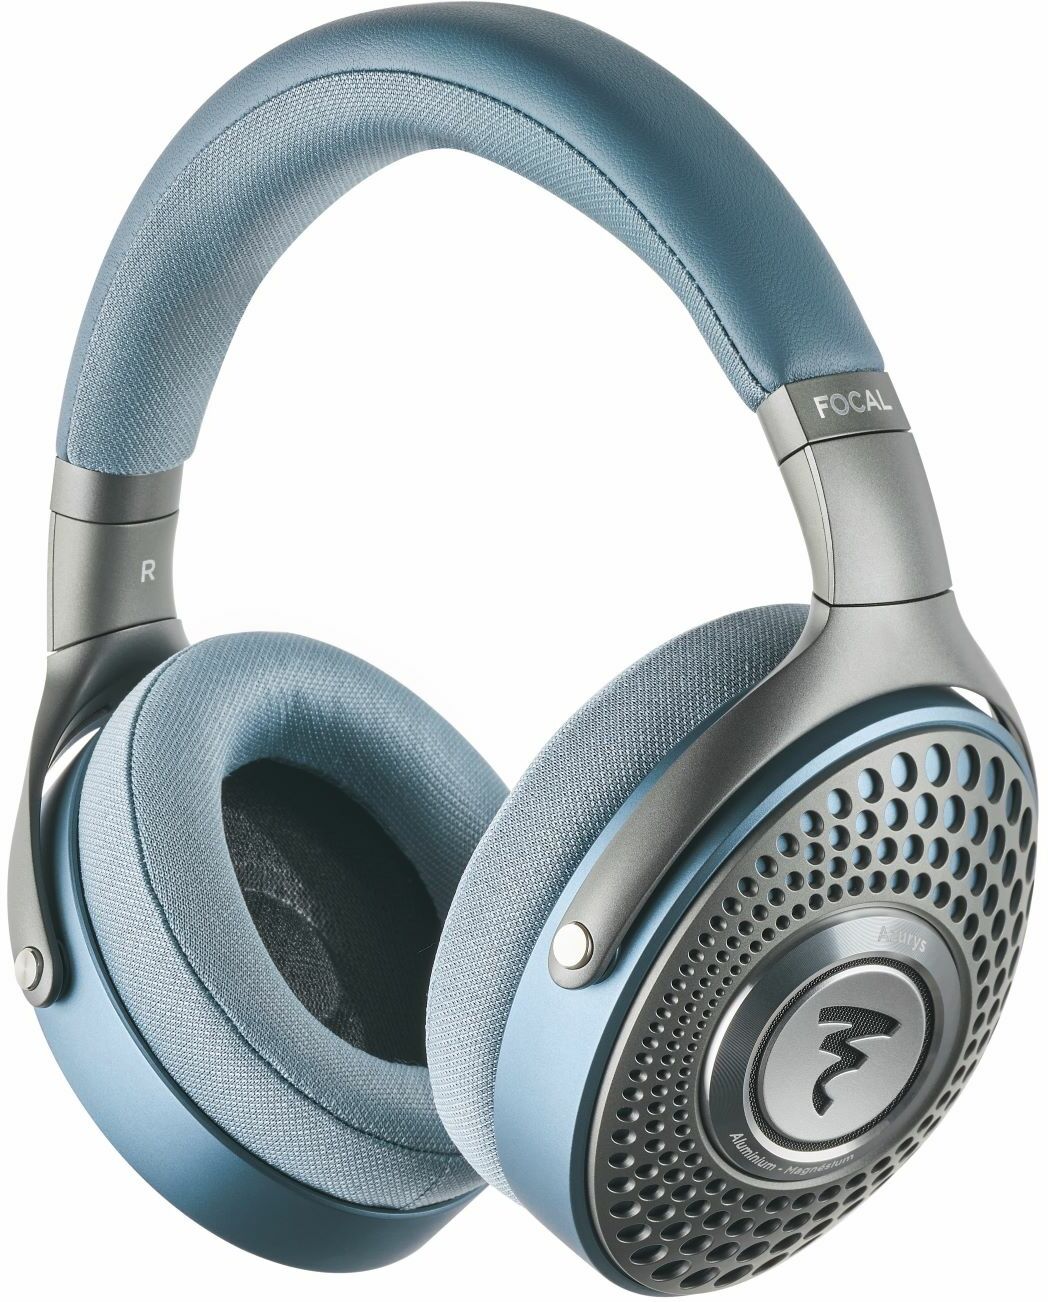 Focal Azurys - Closed headset - Main picture